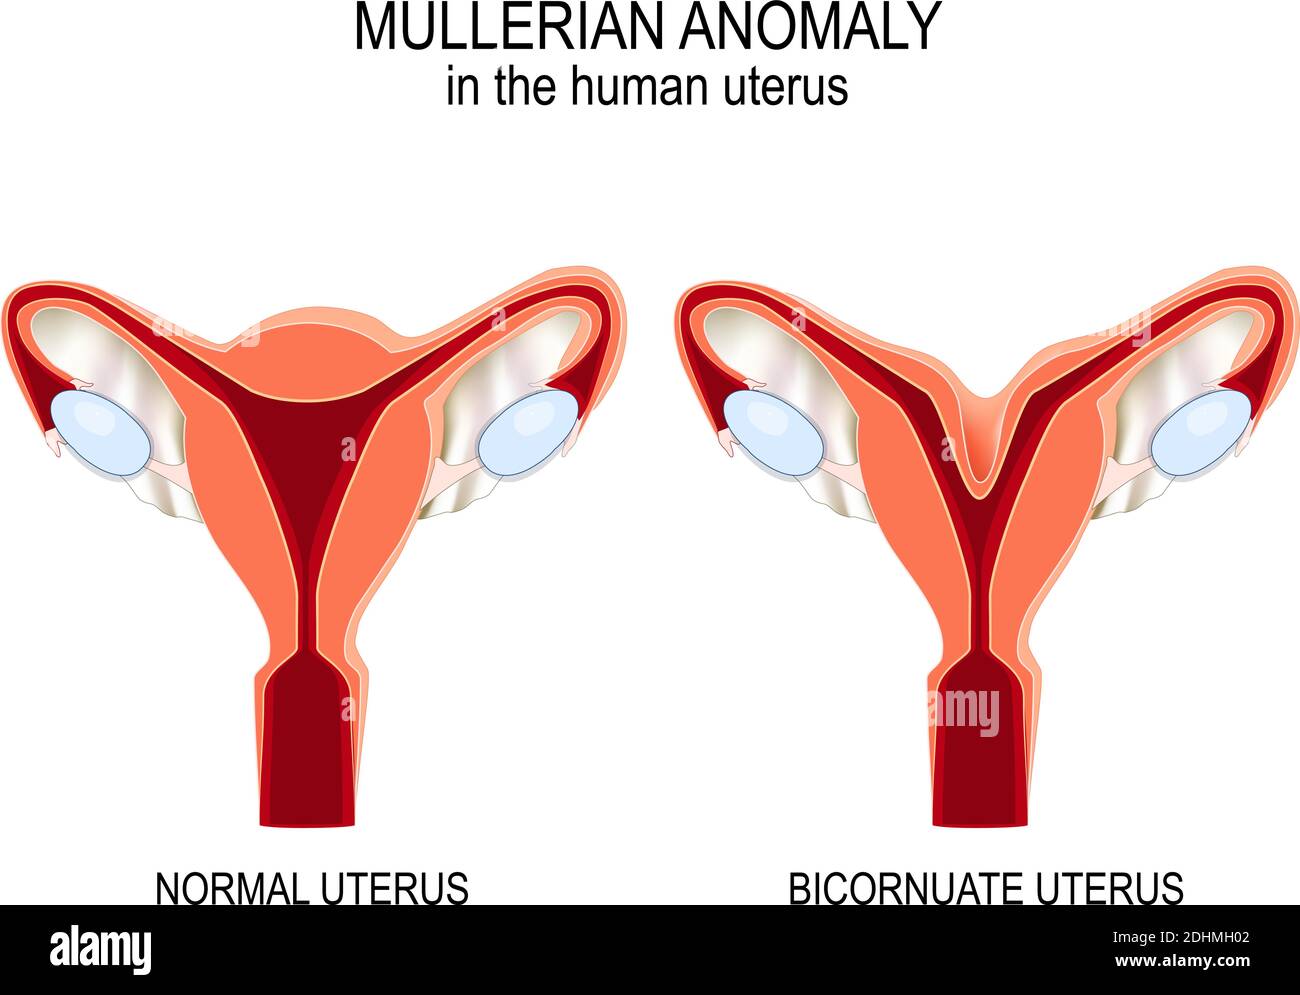 Mullerian anomaly In the human uterus. Normal womb and Bicornuate uterus. Vector illustration for medical, biological, educational and science use Stock Vector